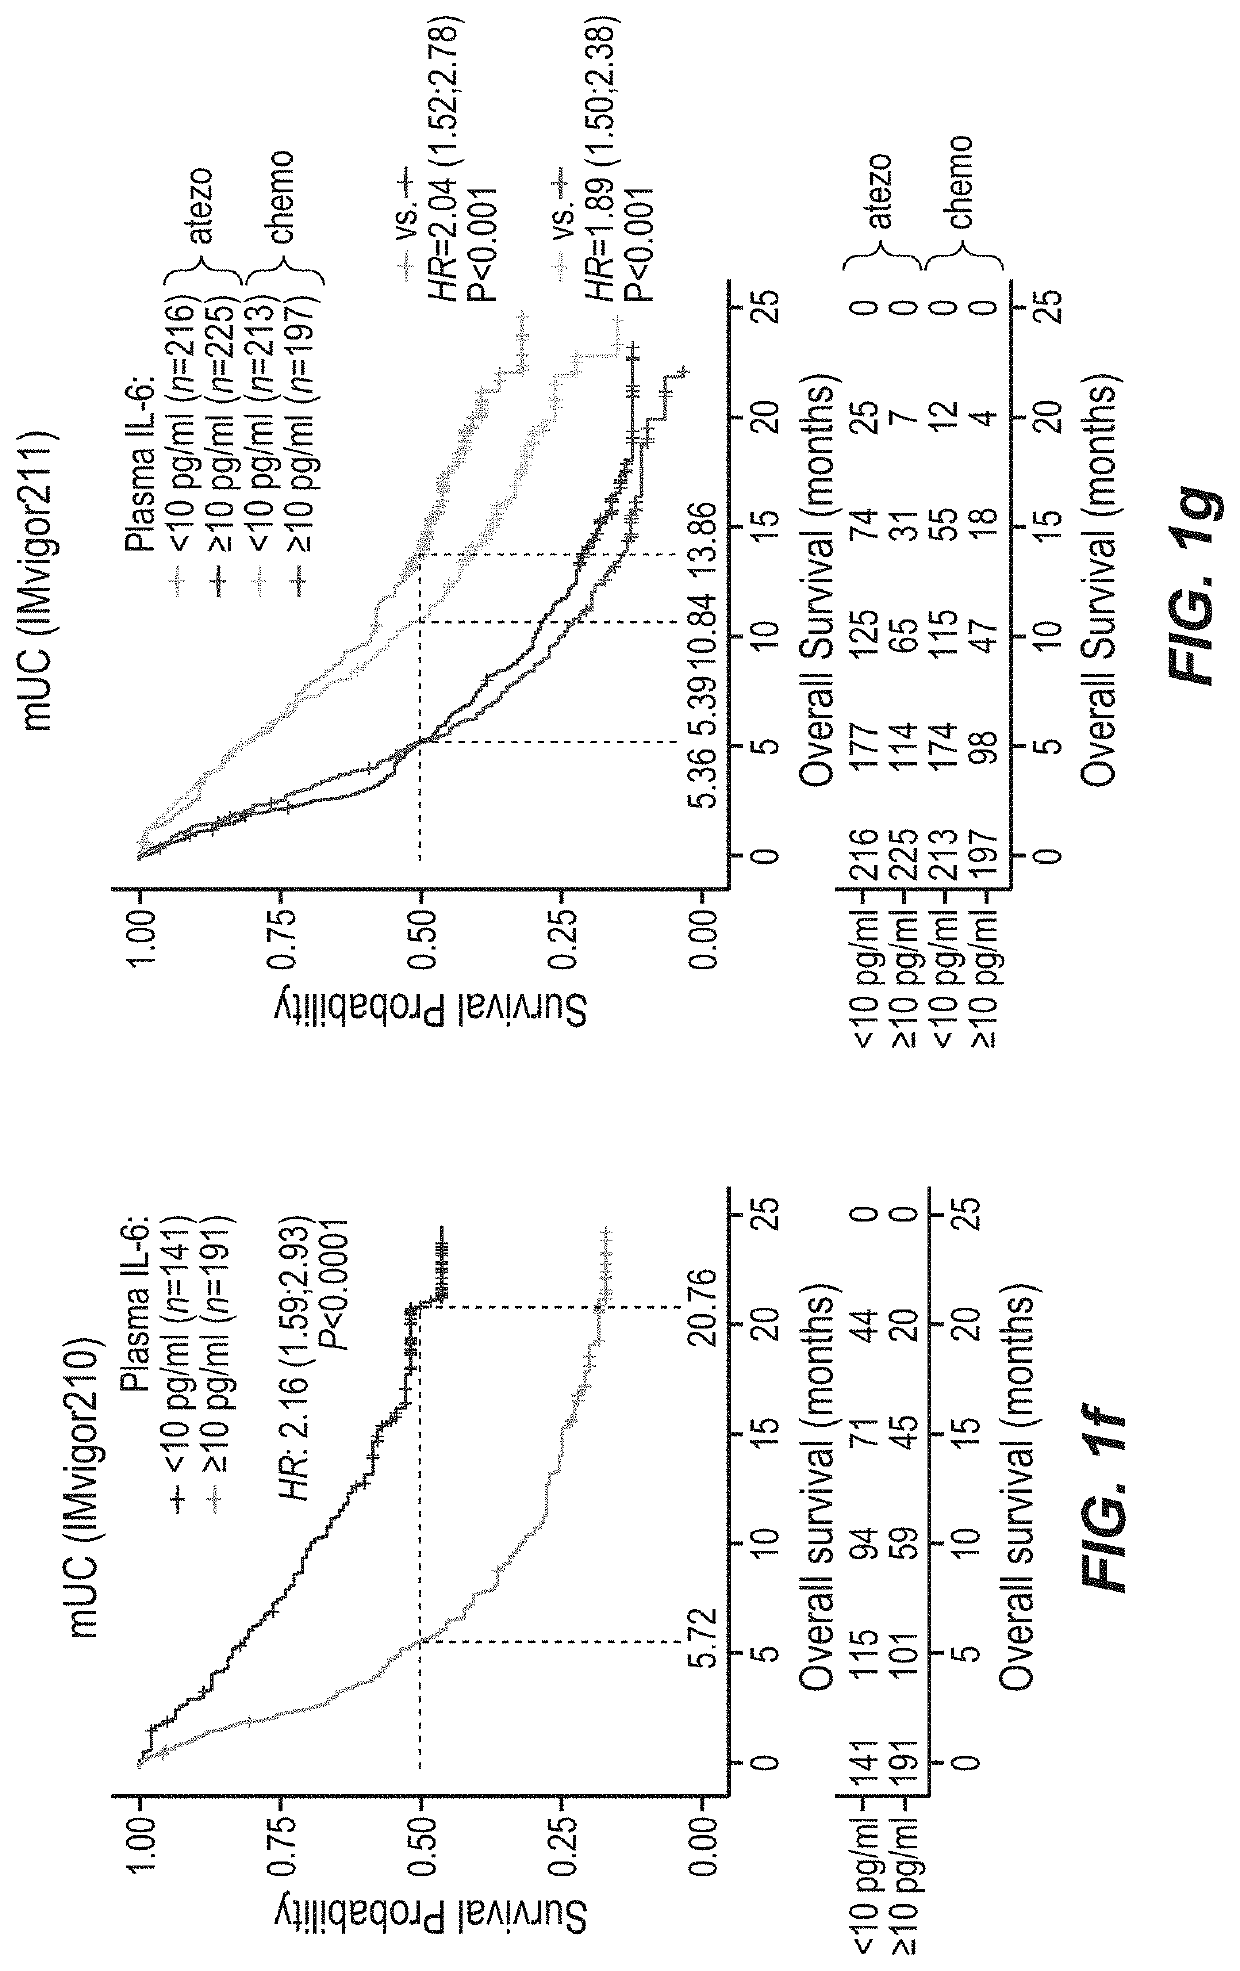 Combination therapy for cancer comprising pd-1 axis binding antagonist and il6 antagonist